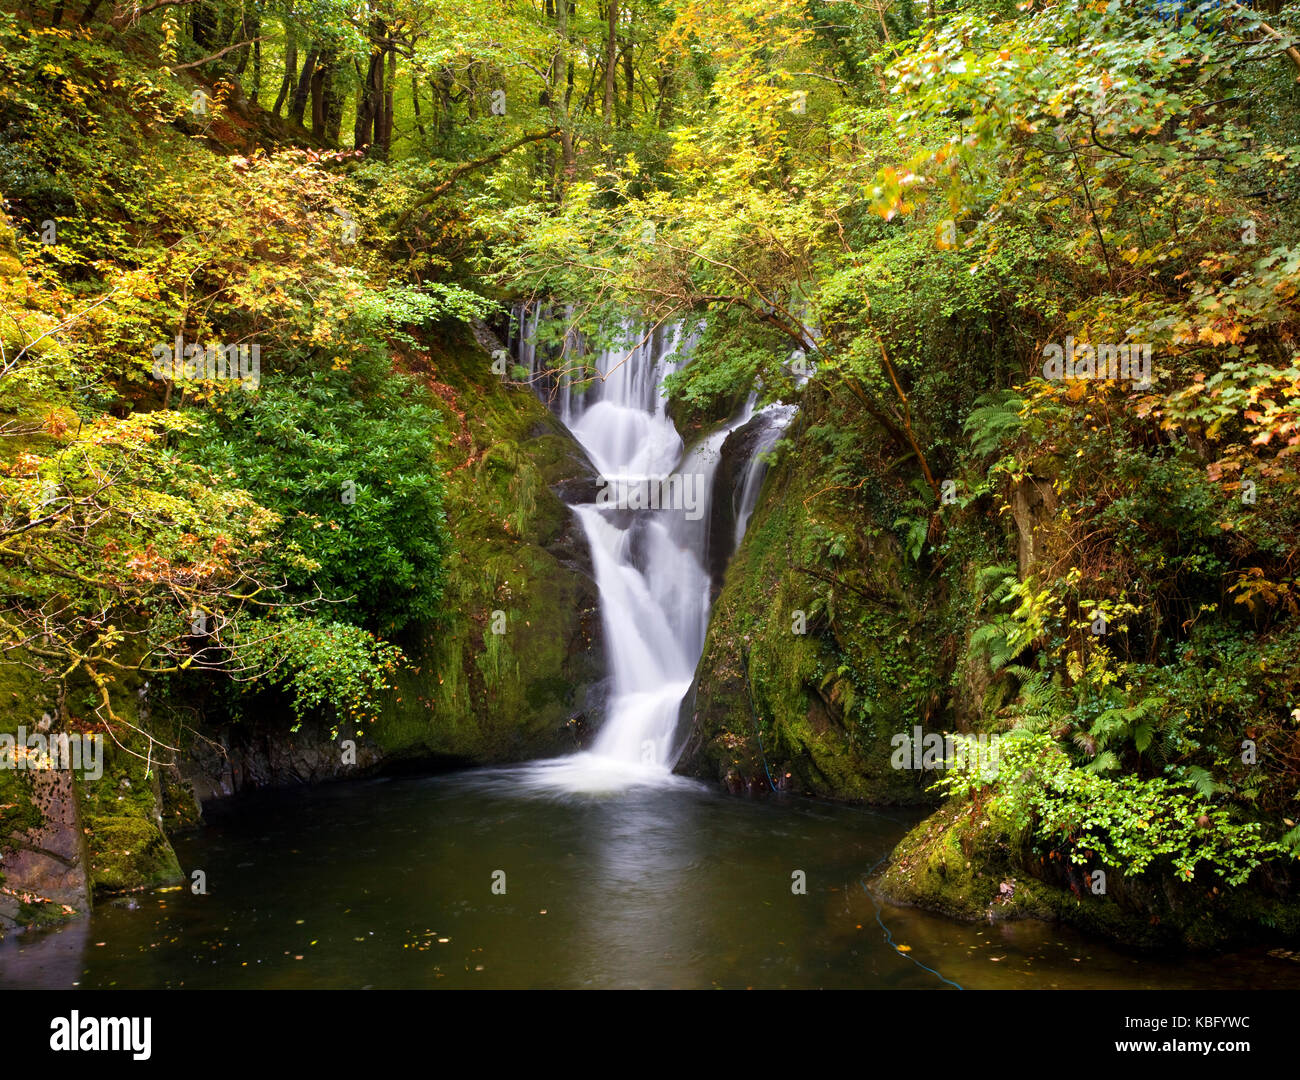 A colourful autumn view of Furnace Falls in Powys, Wales, UK Stock Photo